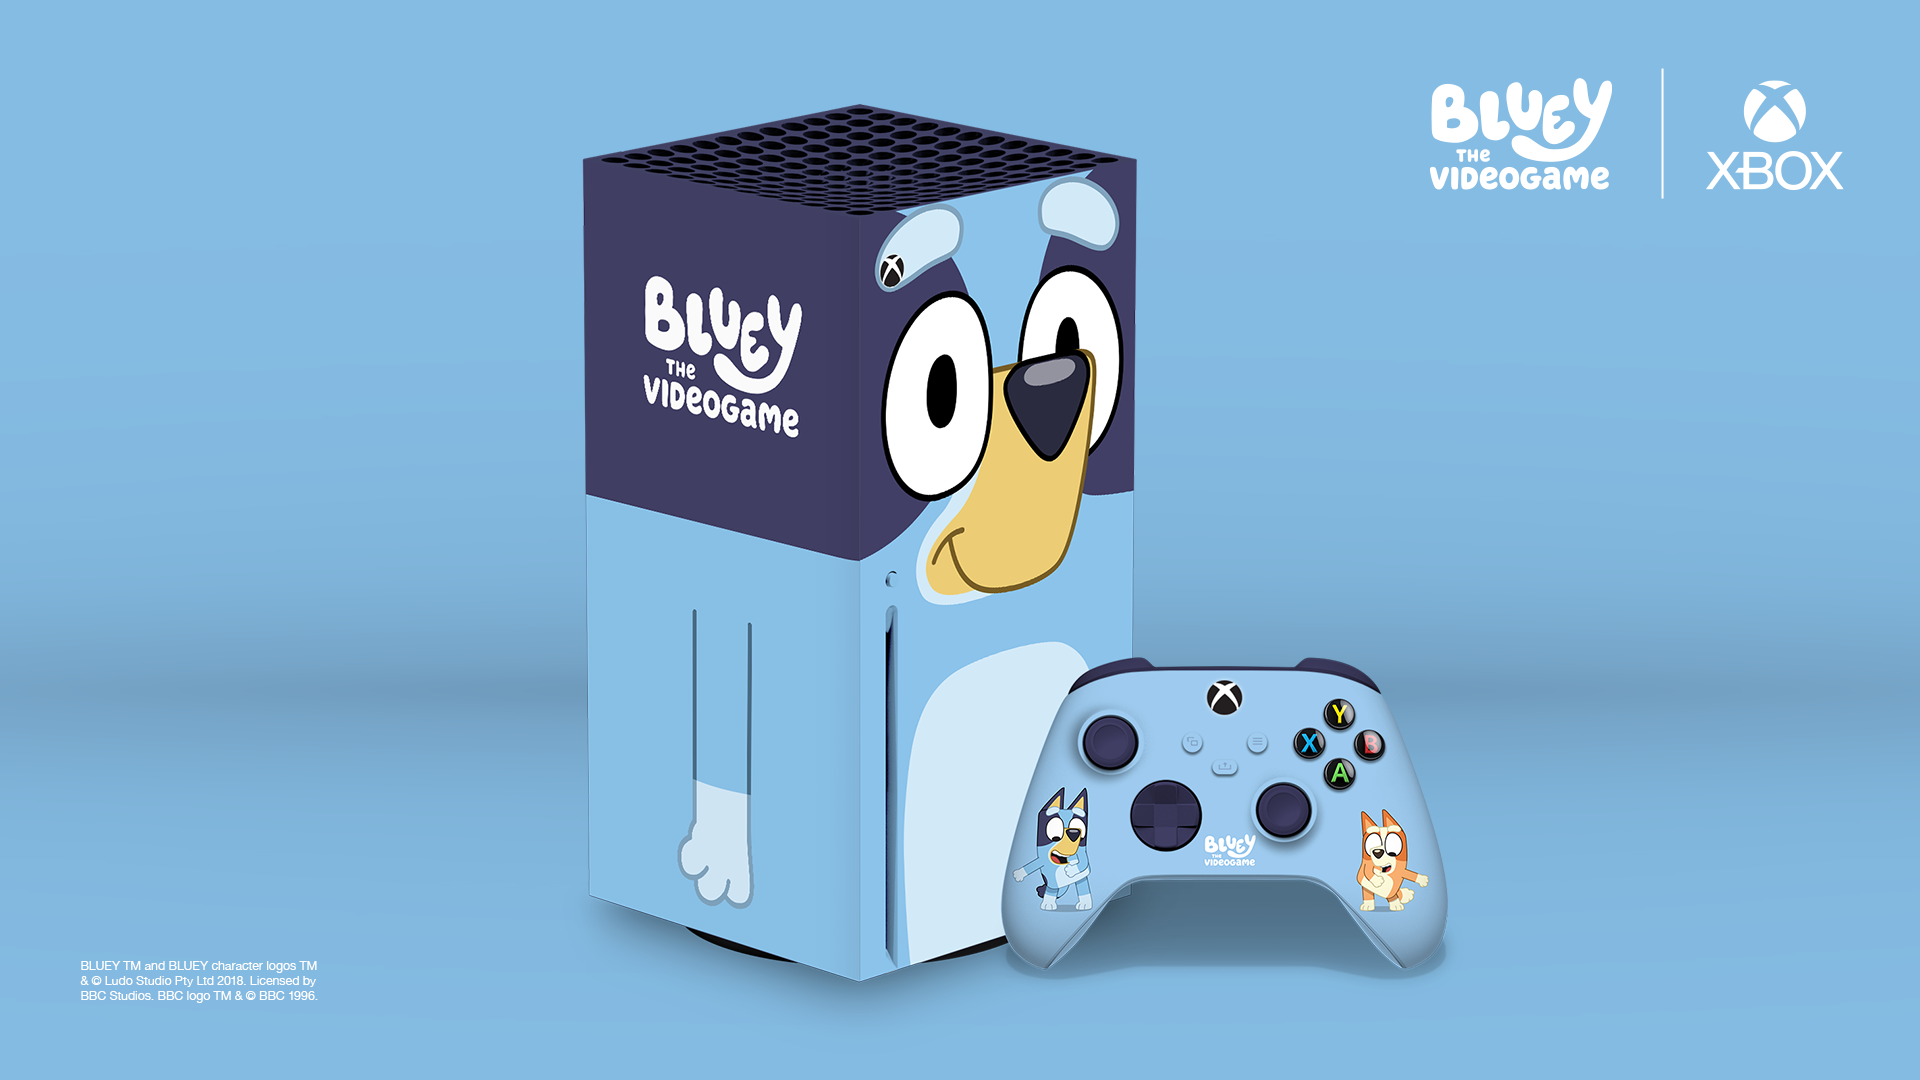 Xbox Launches Global Competition with Bluey-Themed Xbox Series X Release